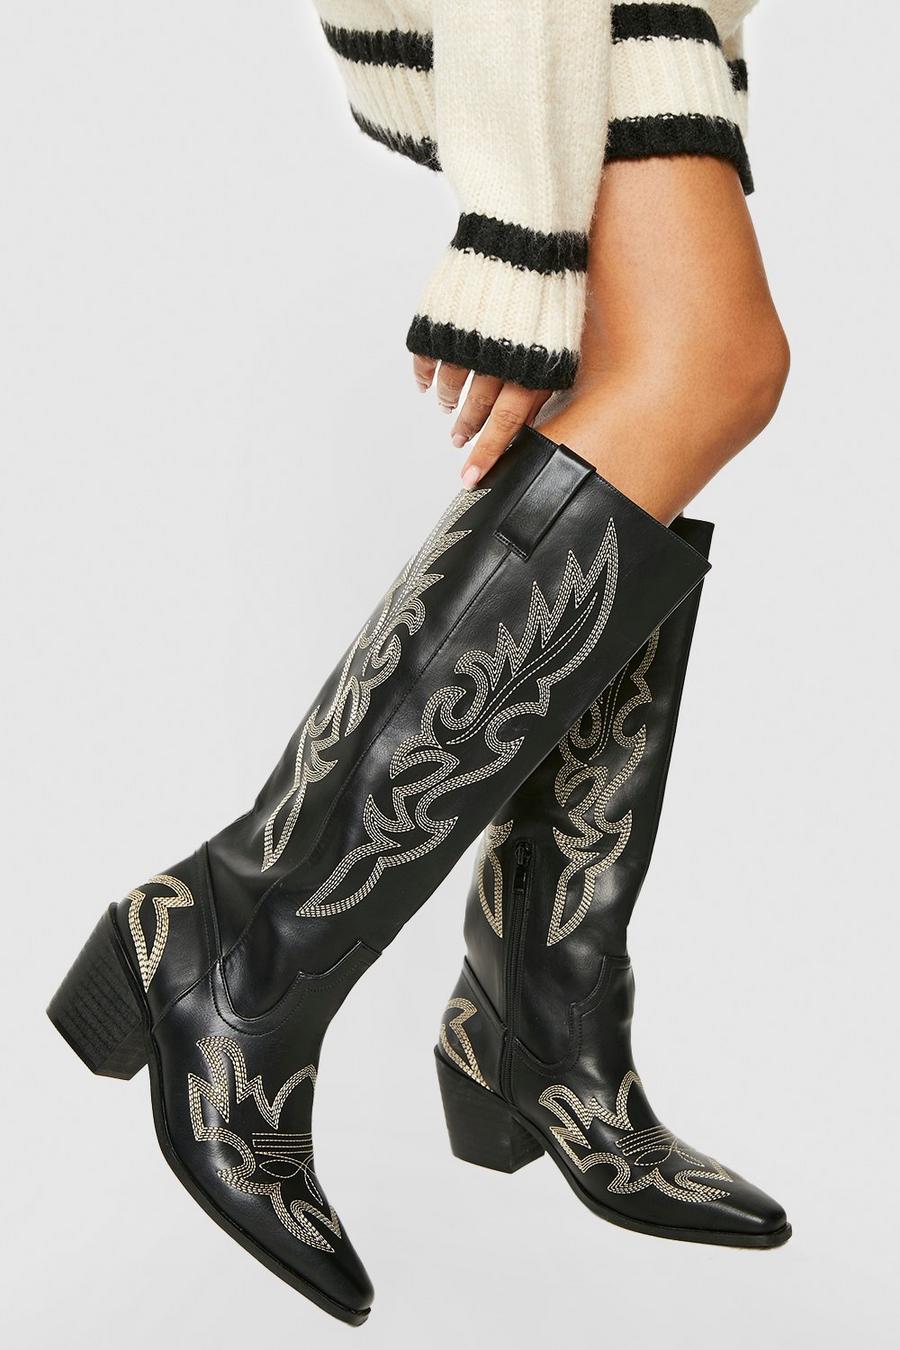 Black Squared Off Knee High Western Cowboy Boots